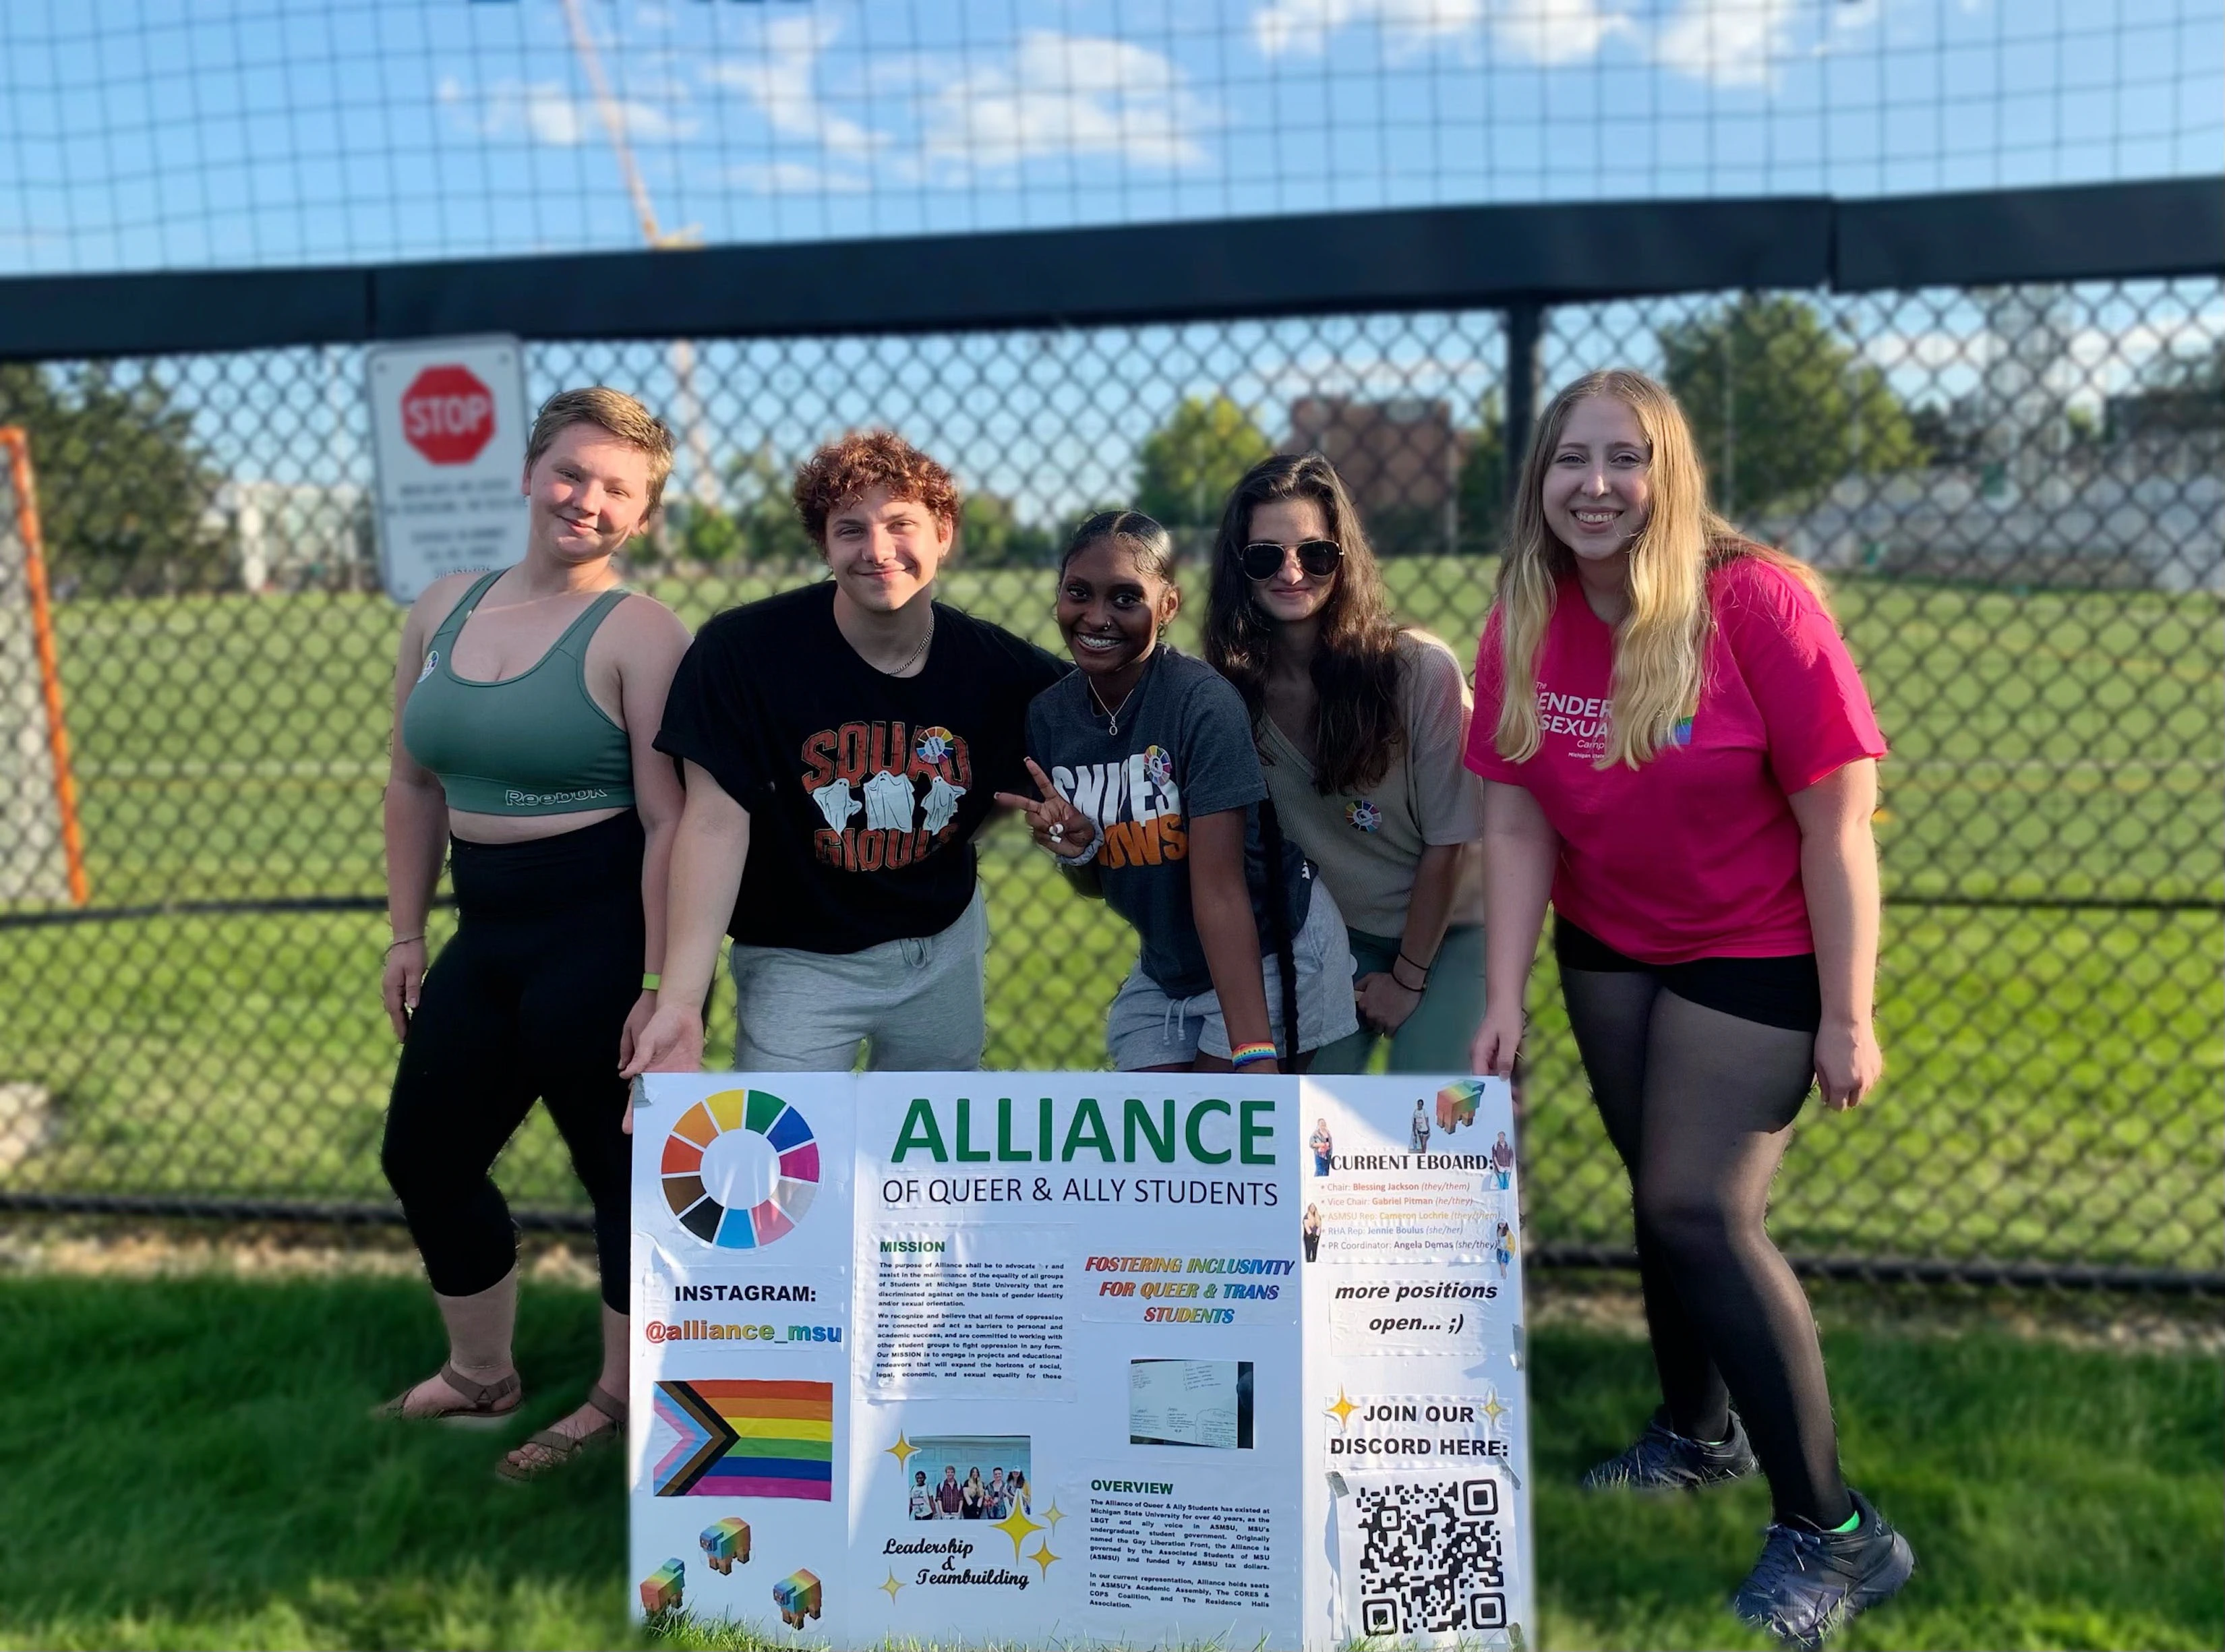 Group of students pose for an outdoor photo with a poster presentation board of The Alliance of Queer and Ally Students